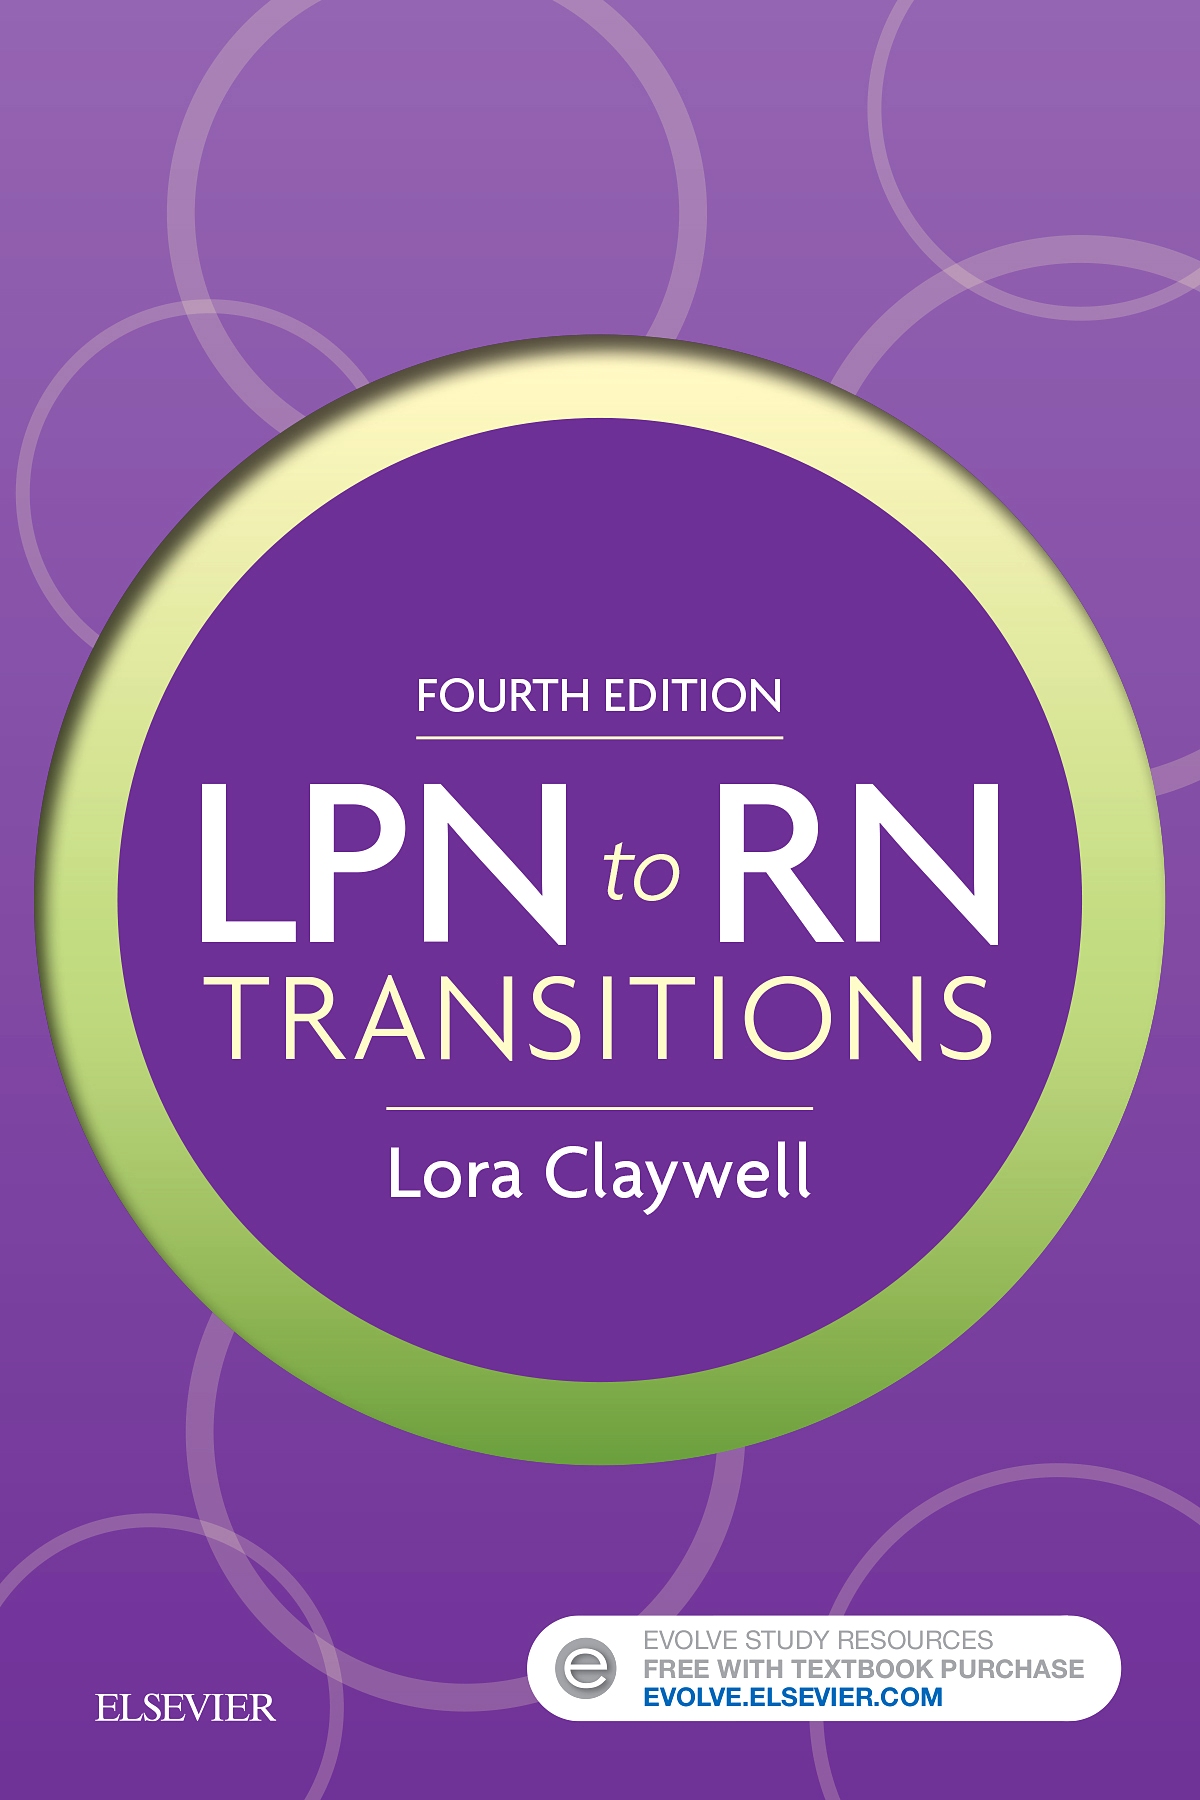 Evolve Resources for LPN to RN Transitions, 4th Edition